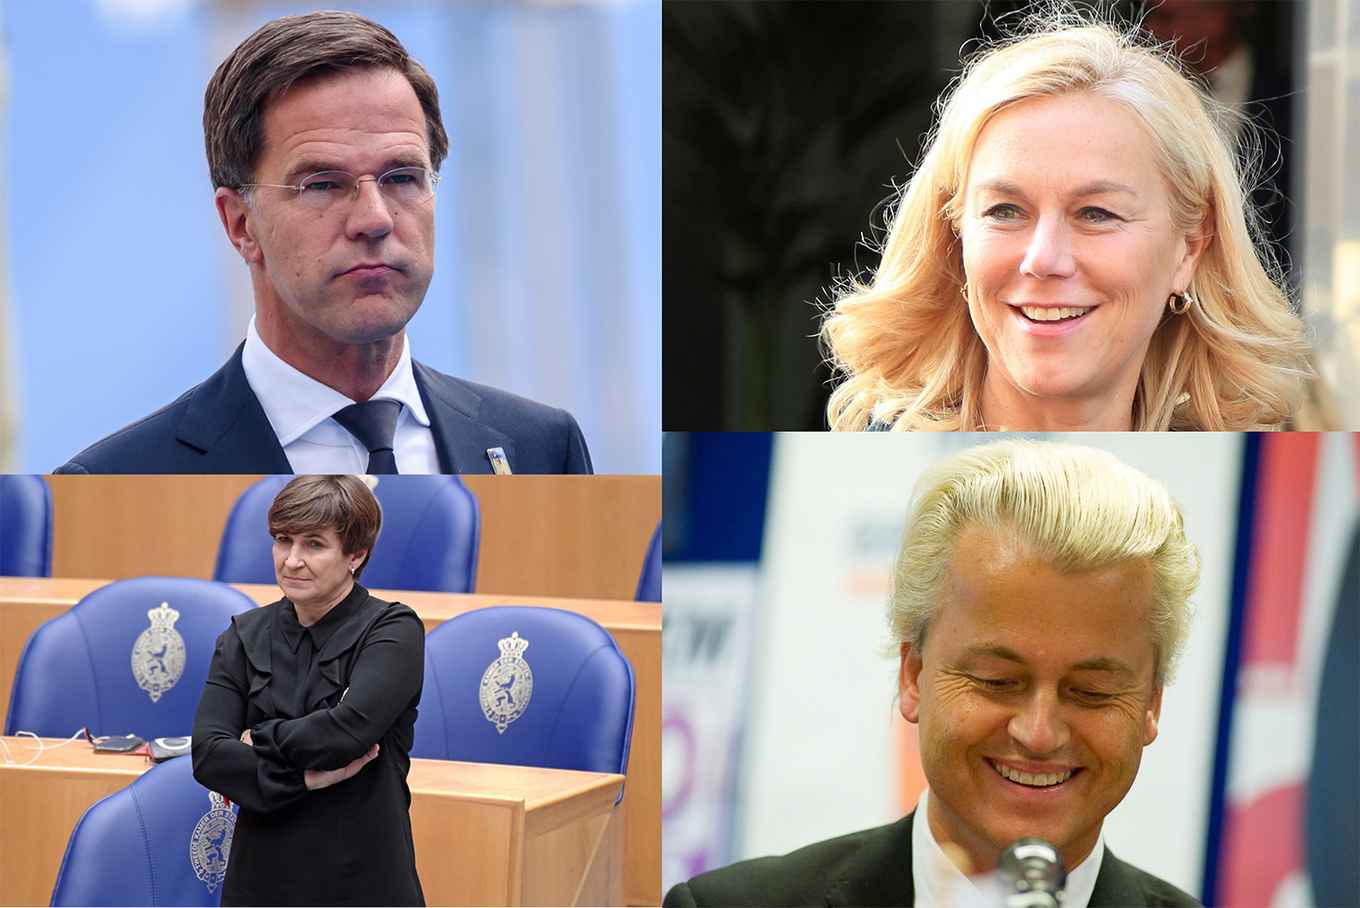 Dutch politicians showing frowning and happy faces